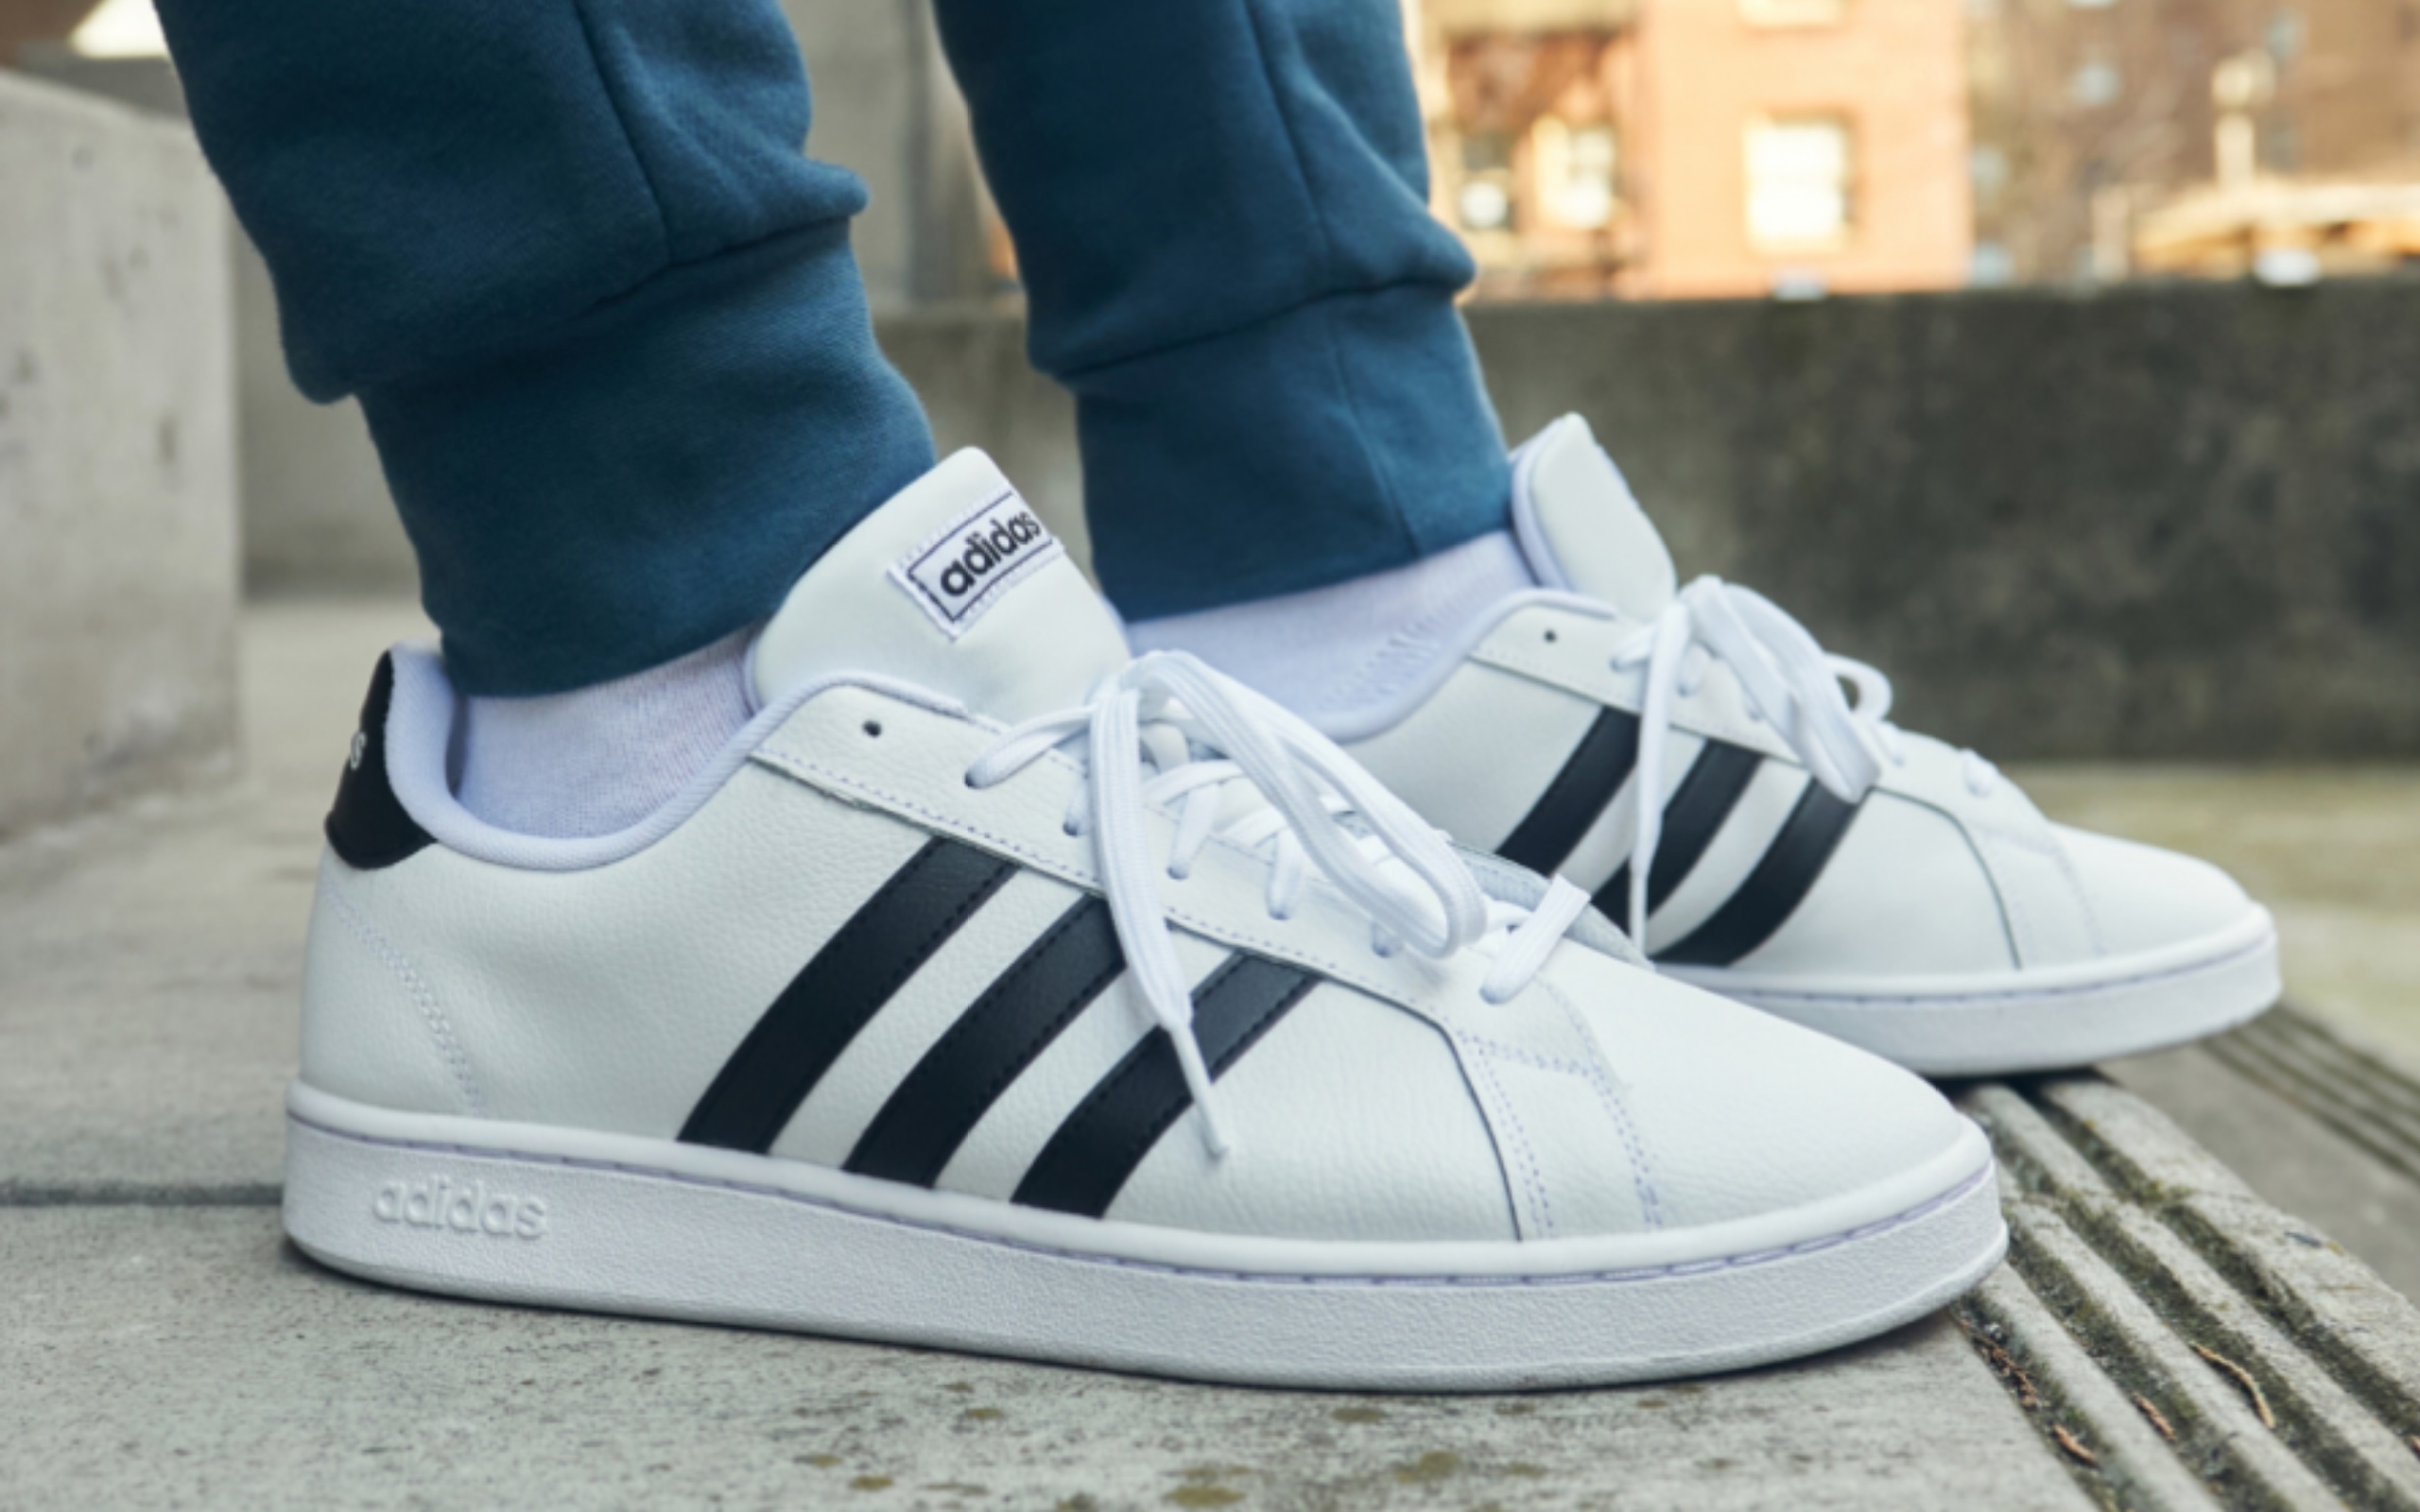 adidas Spring Sale is live! Score 30% off new arrivals including ...